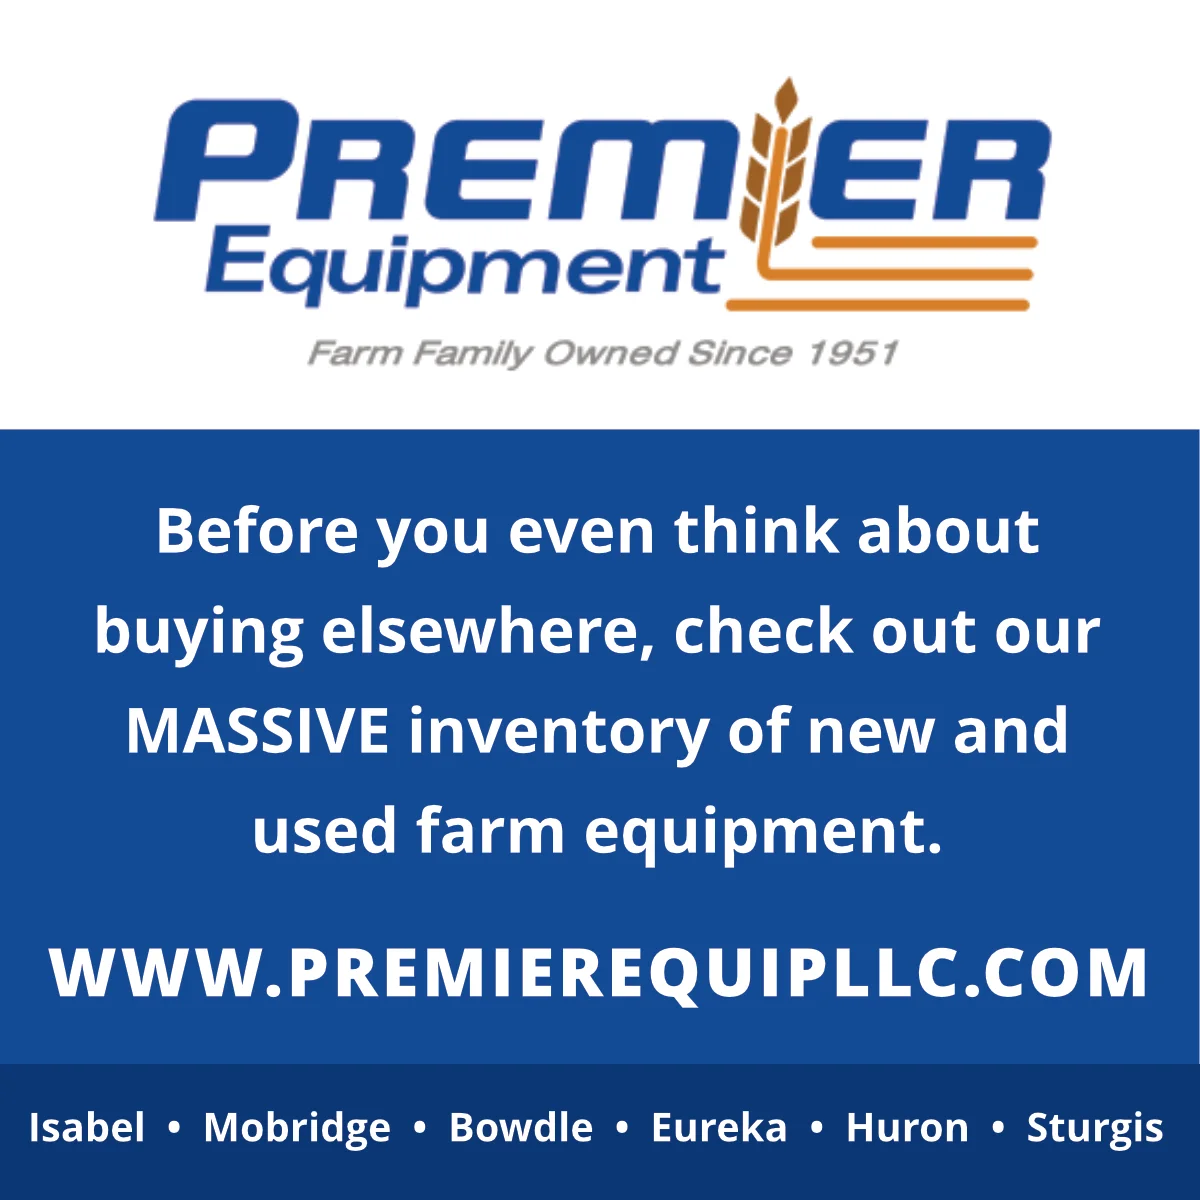 Premier Equipment - Before you think about buying elsewhere, check out our massive inventory of used and new farm equipment.  Visit website.